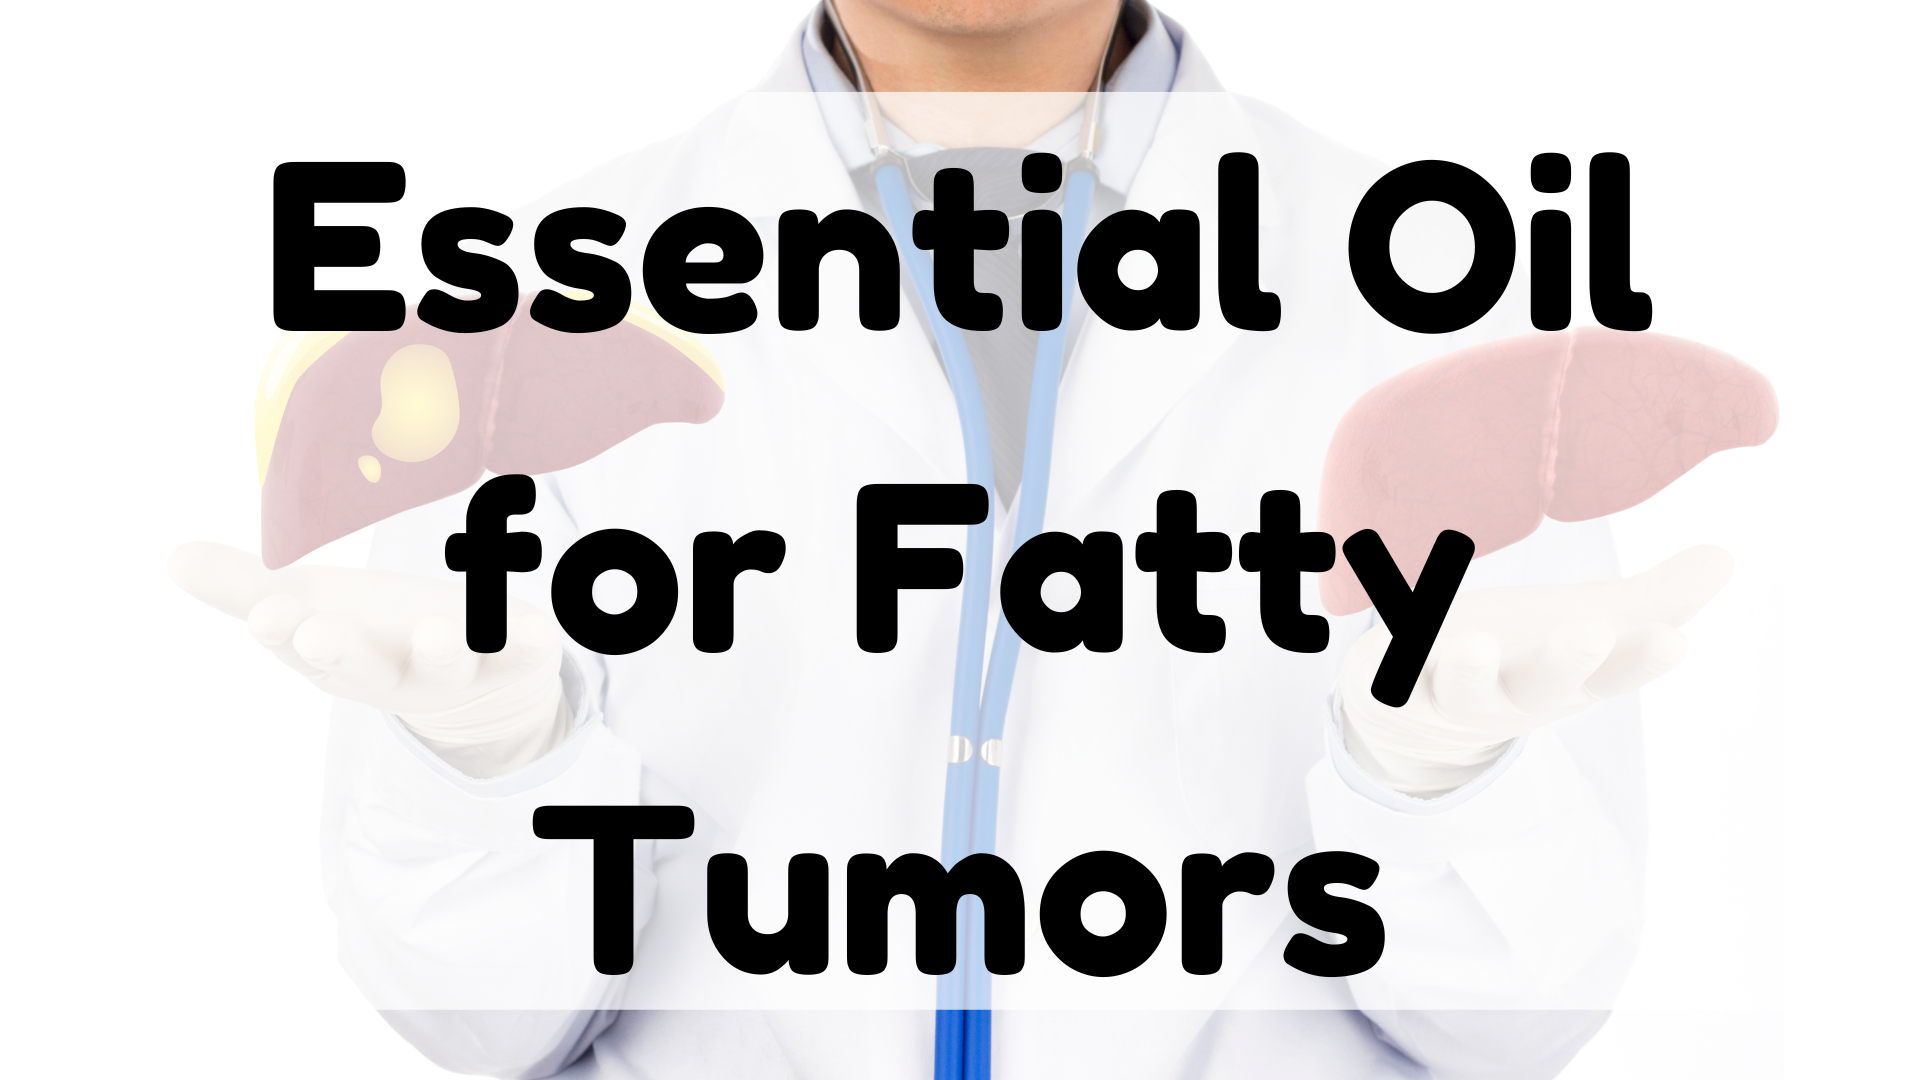 Essential Oil for Fatty Tumors featured image